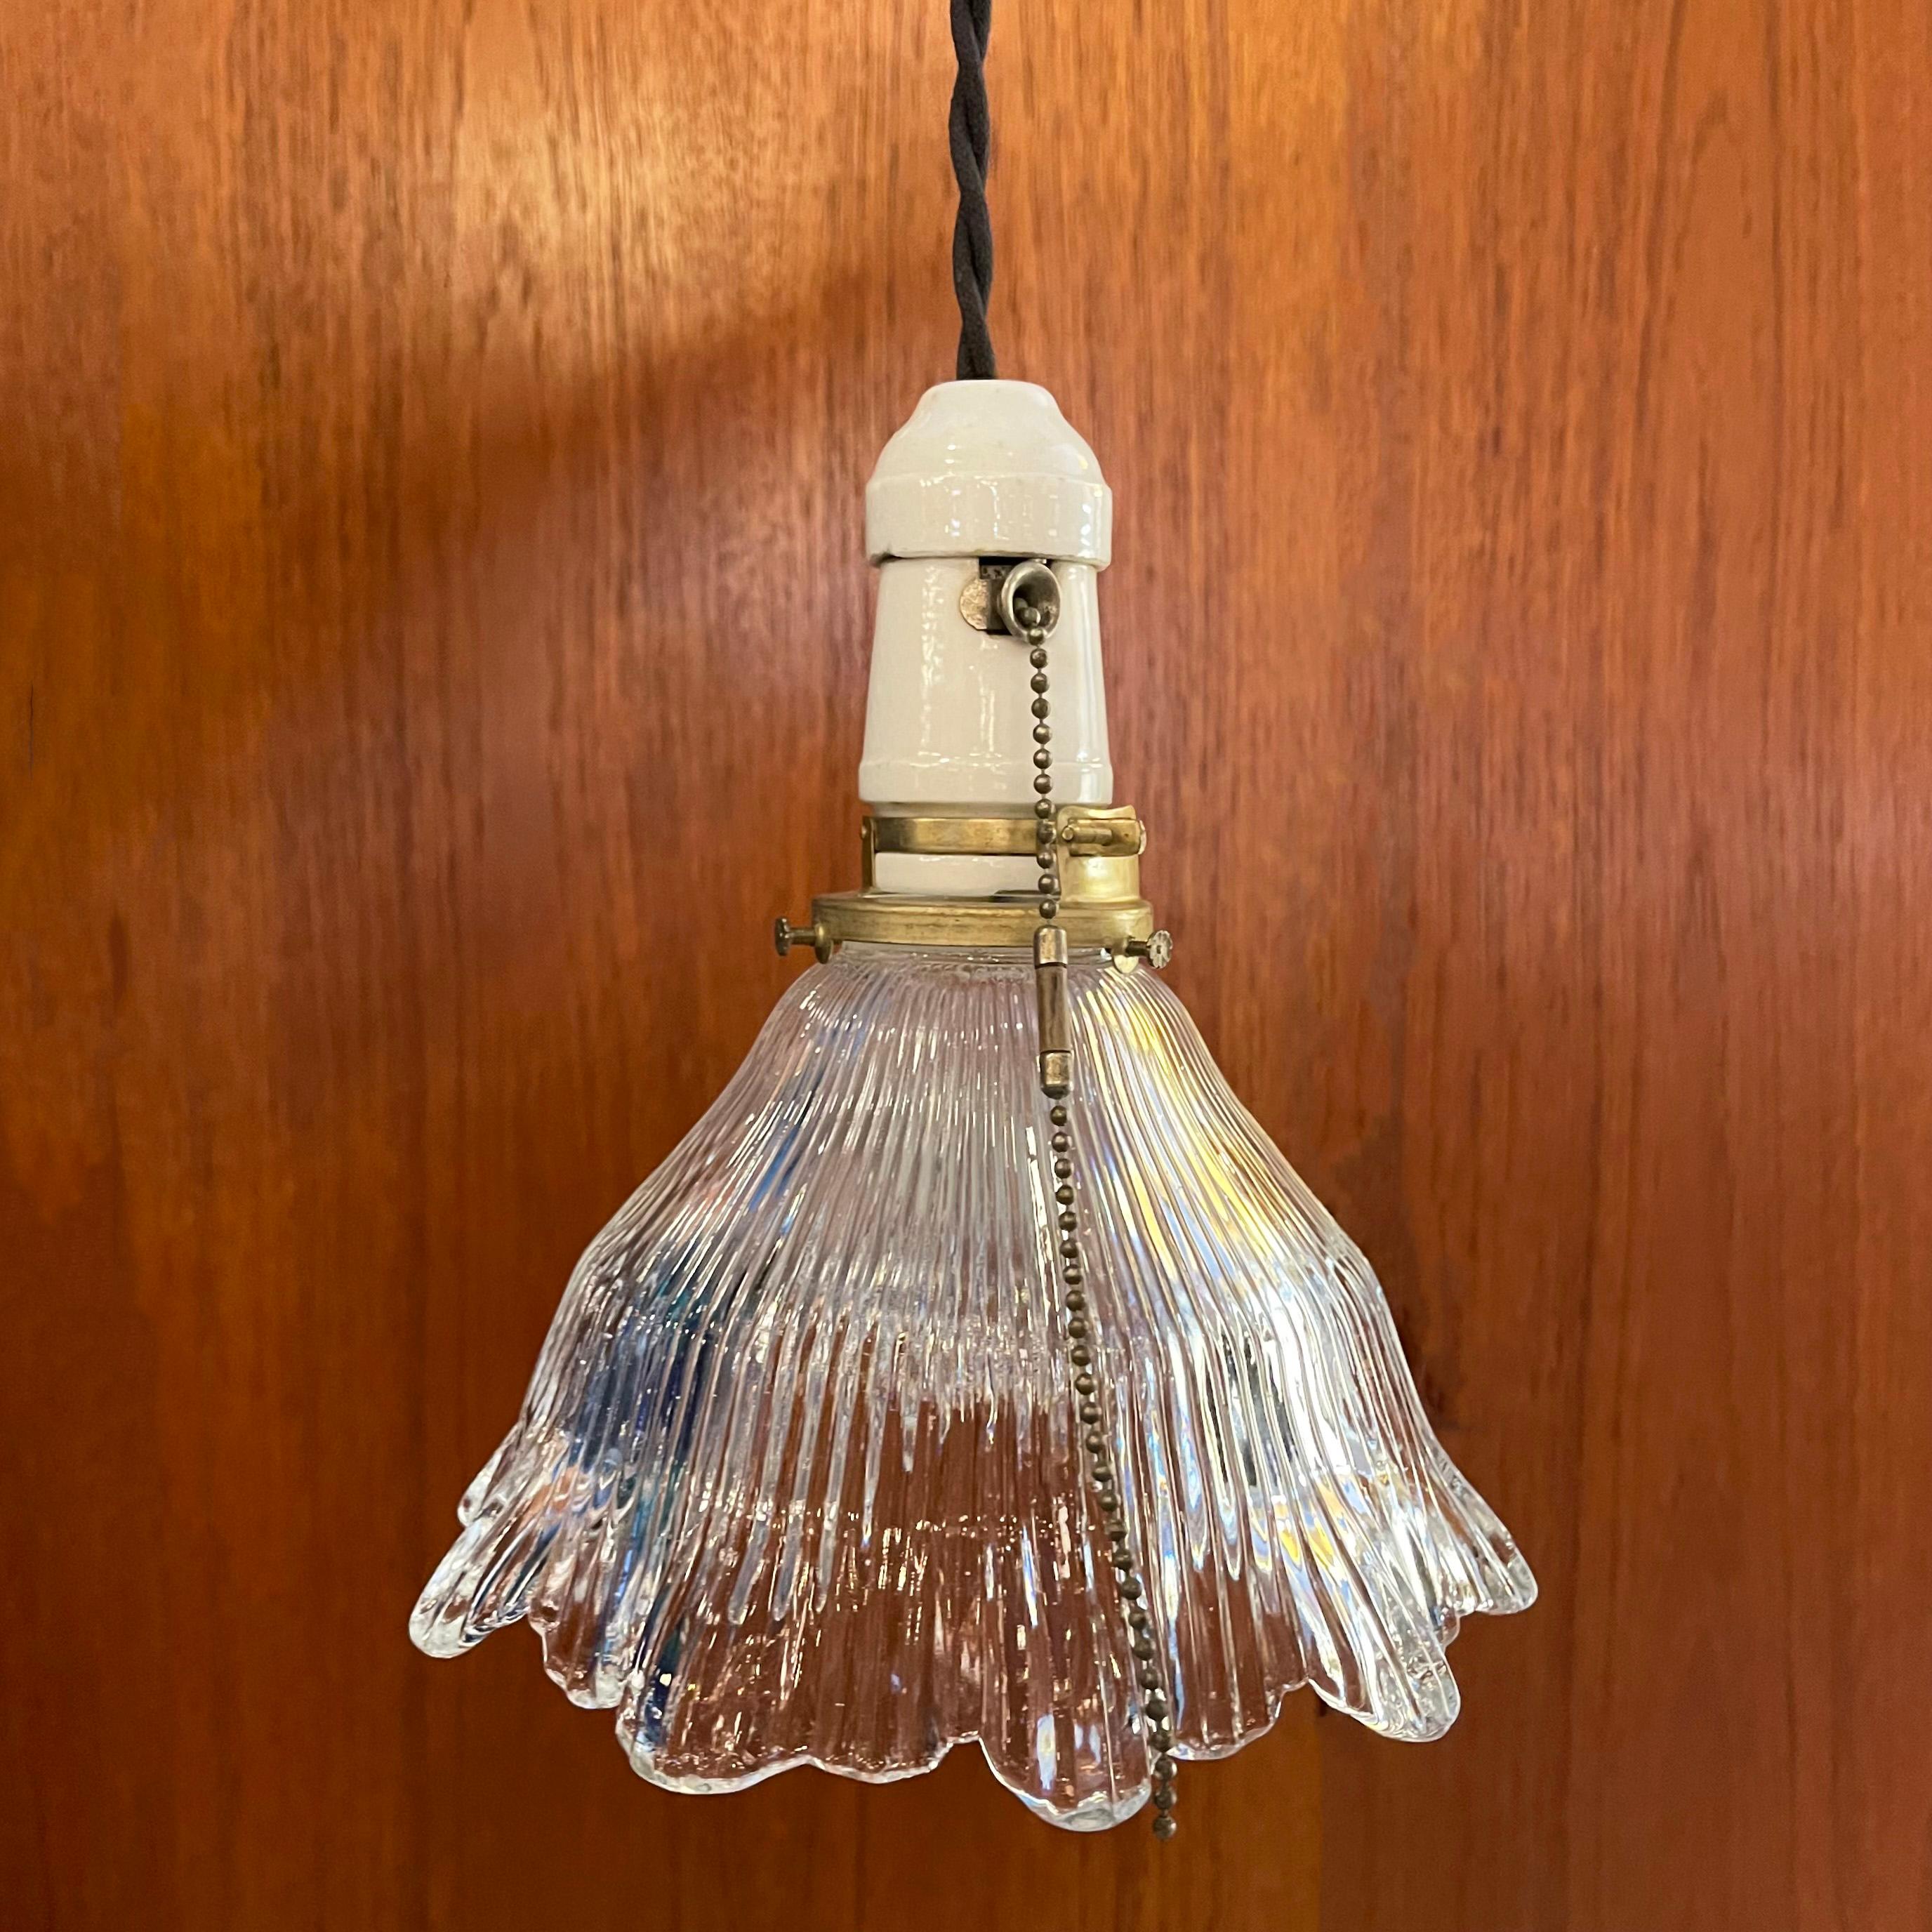 Industrial pendant light features a cut glass shade with irregularly scalloped edge with porcelain pull-chain socket and brass fitter. The pendant is newly wired with 40 inches of braided cloth cord.